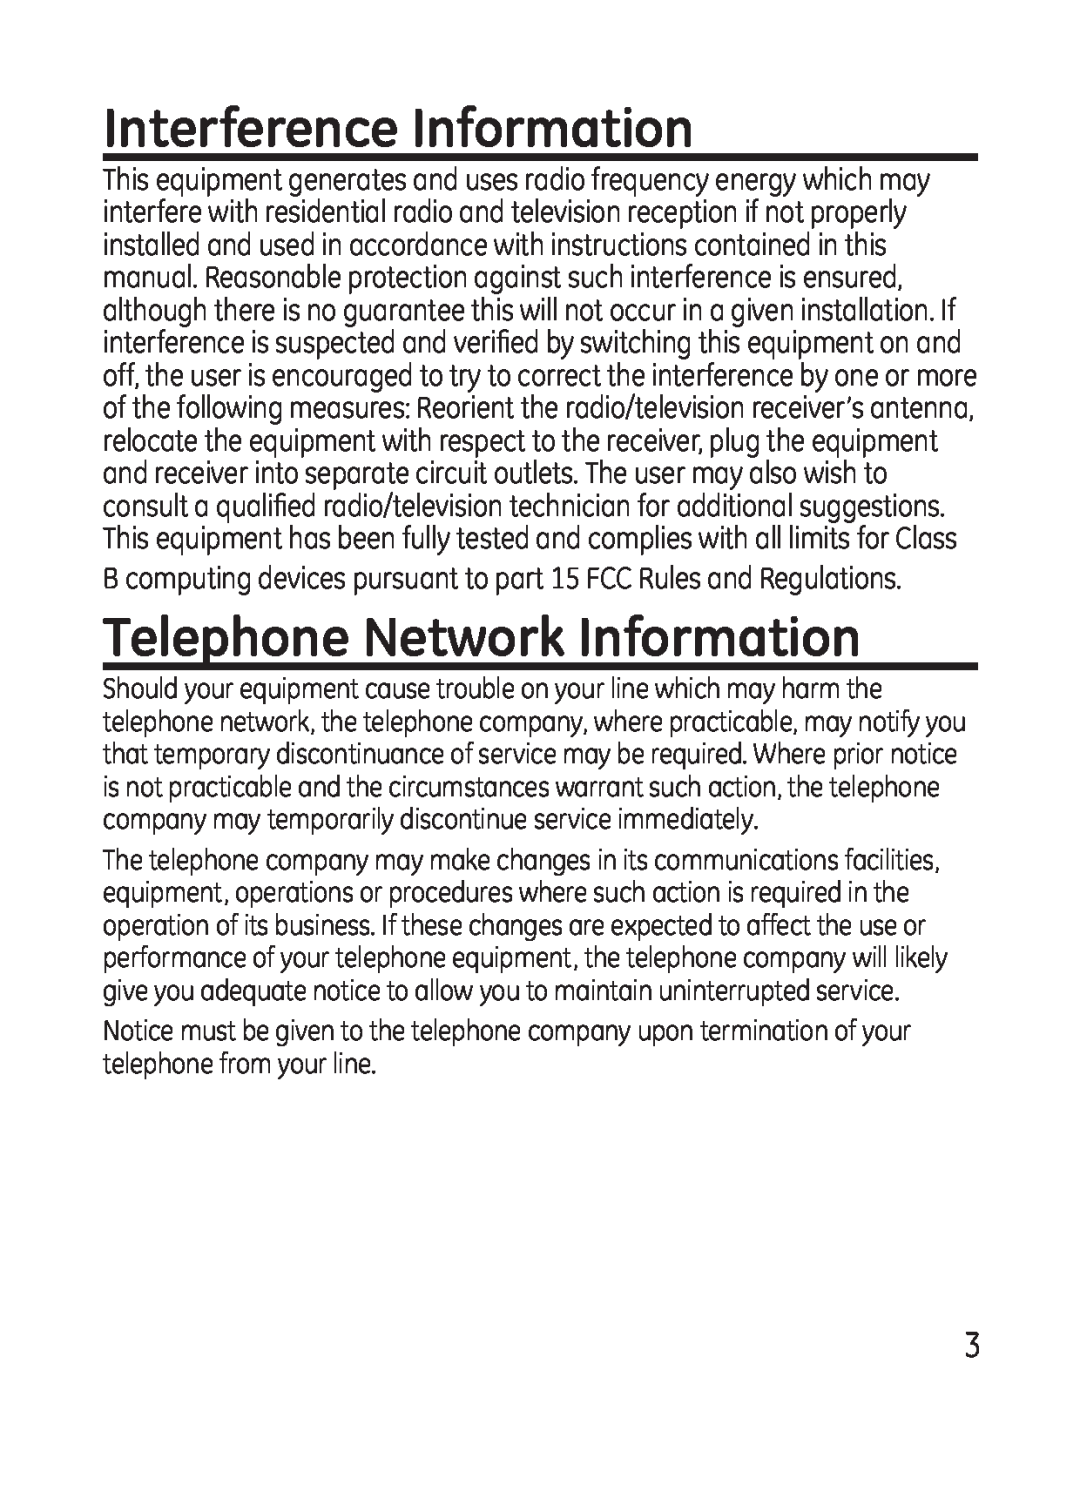 GE 28301 manual Interference Information, Telephone Network Information 